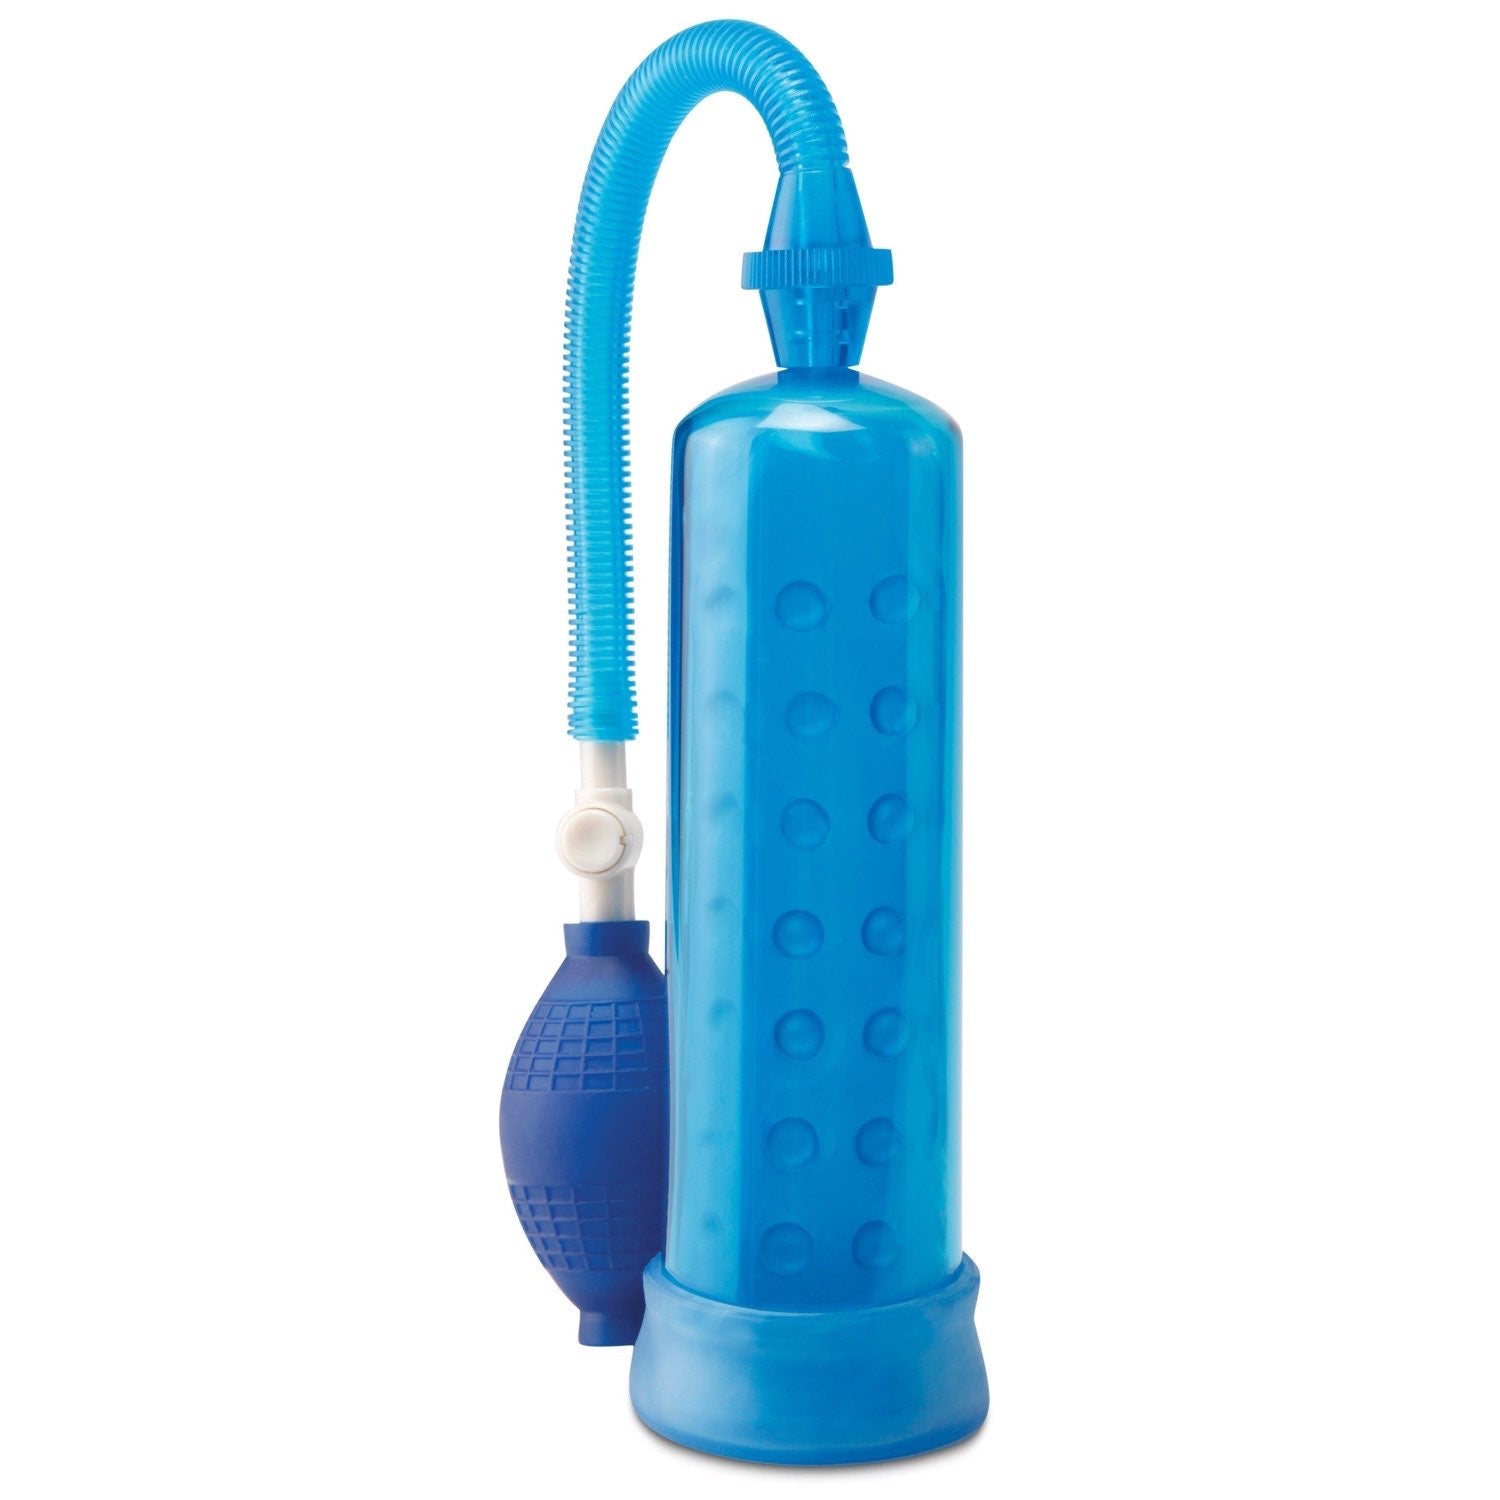 Pump Worx Silicone Power Pump - Blue Penis Pump by Pipedream